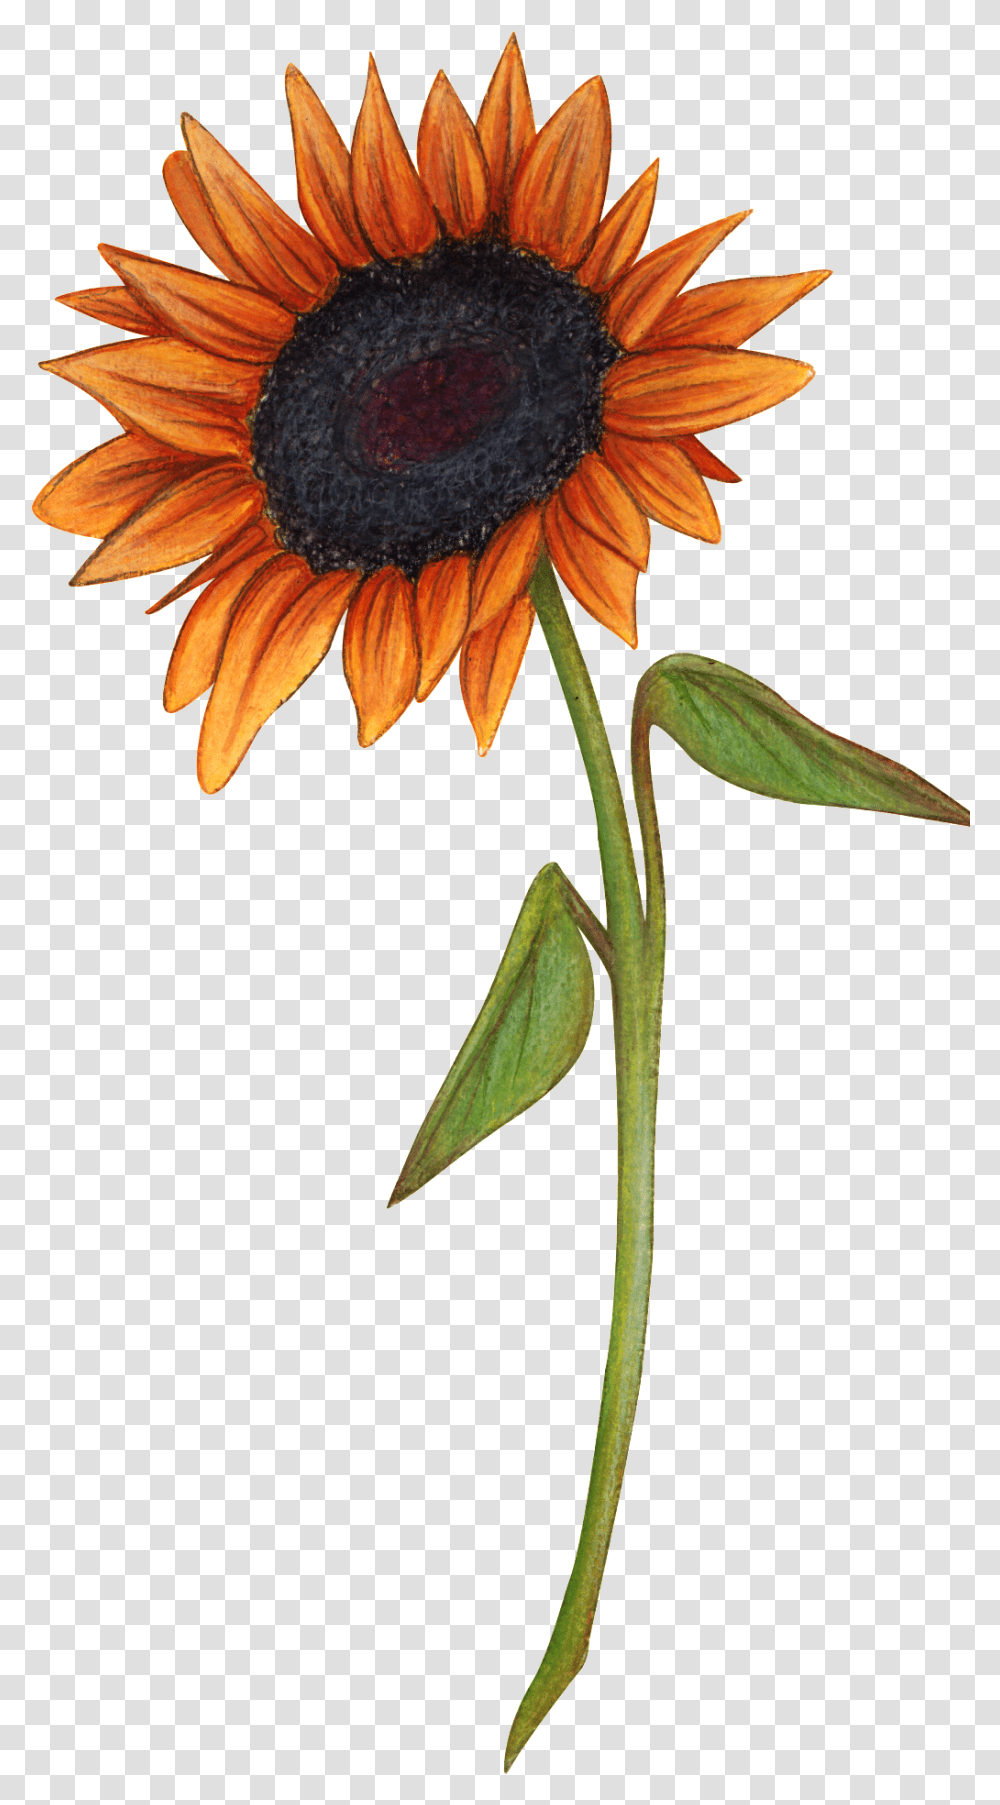 Hand Drawn A Sunflower Portable Network Sunflower, Plant, Blossom, Daisy, Daisies Transparent Png